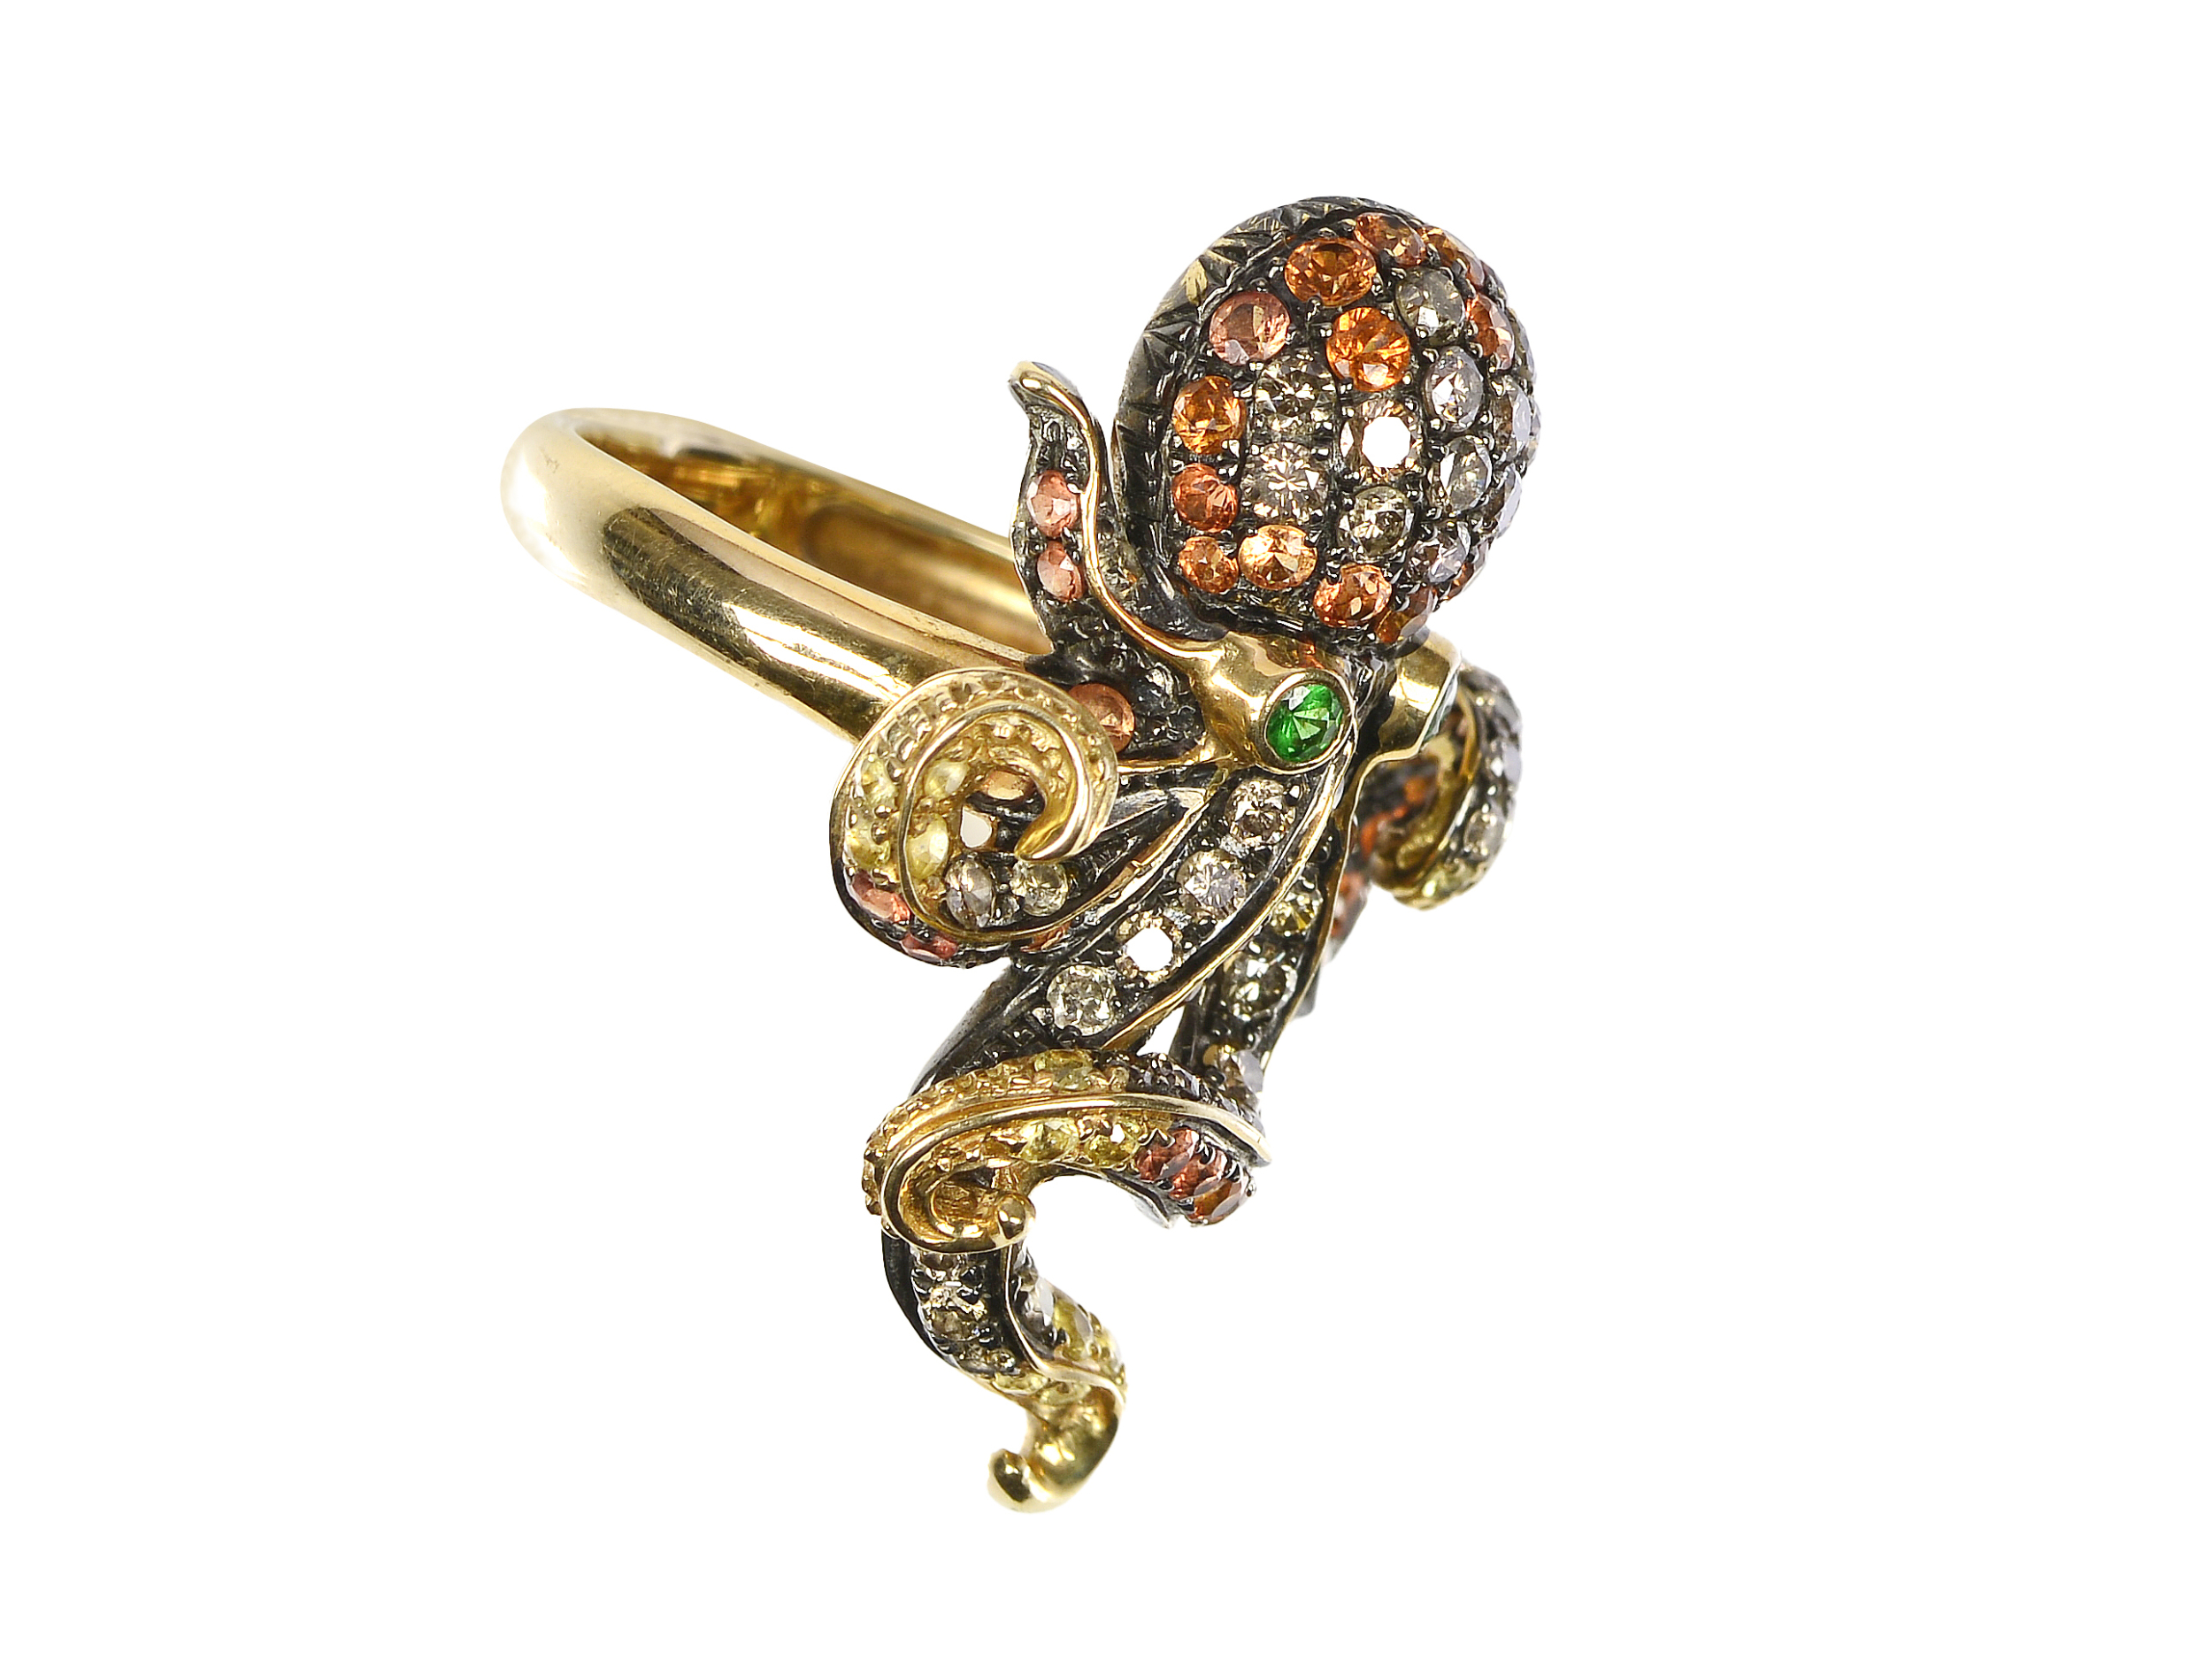 Ring with an octopus - Image 4 of 5